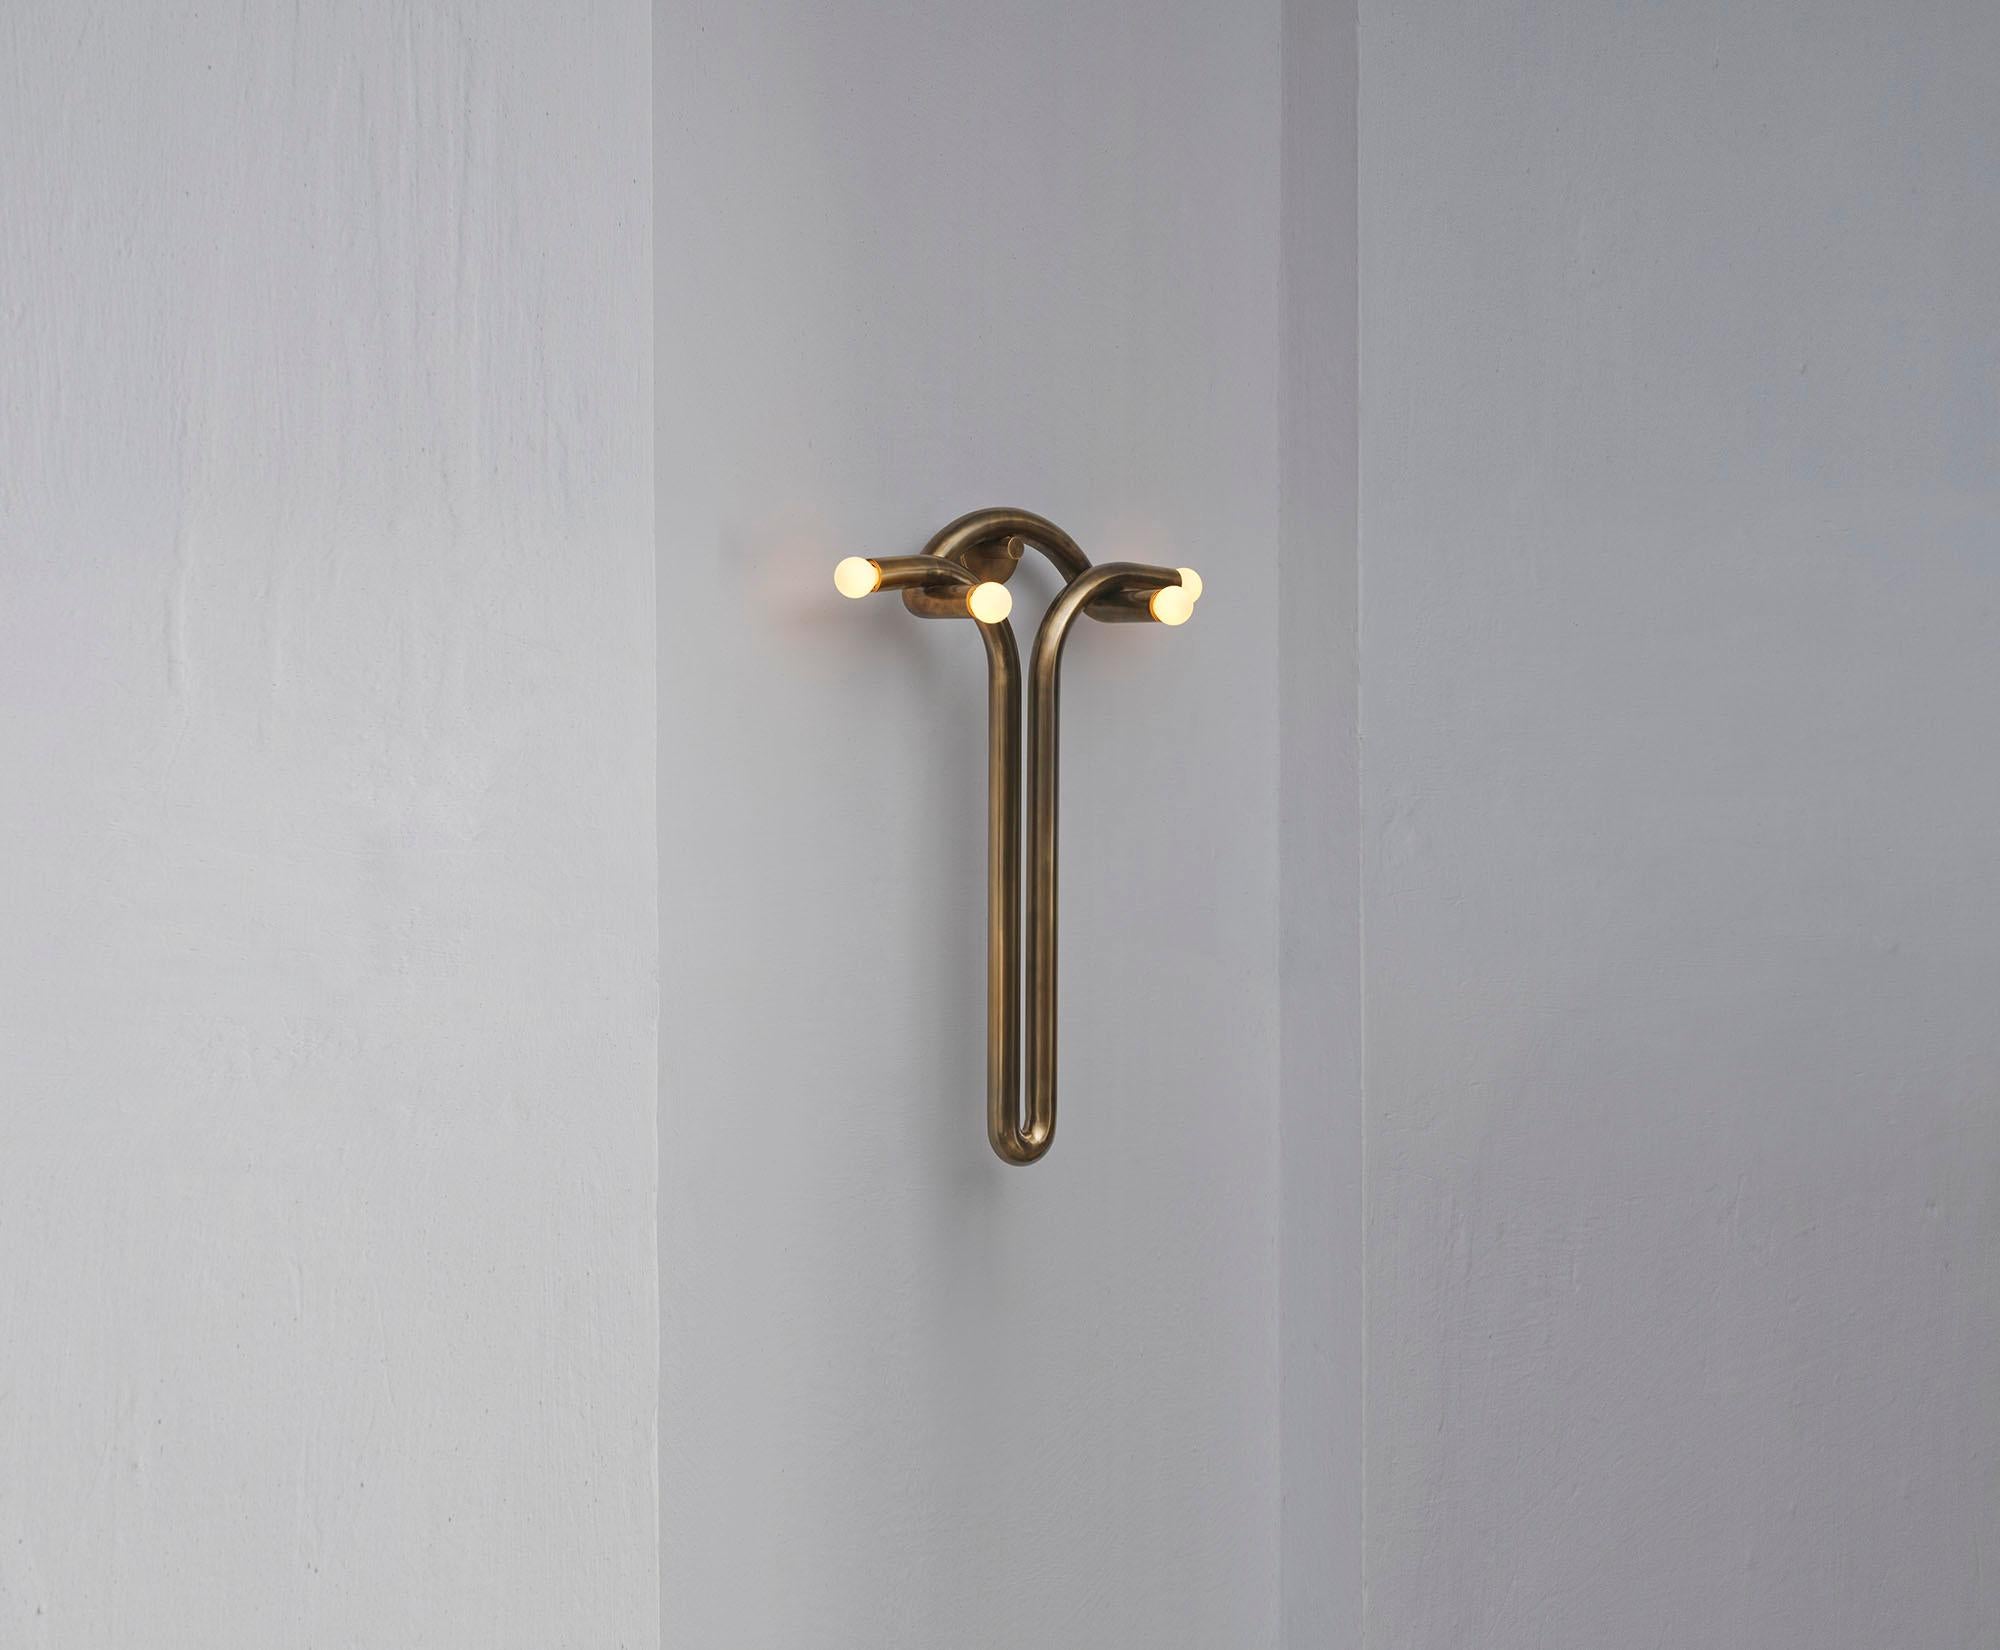 Contemporary Aged Brass Wall Sconce, Goddess Sconce by Paul Matter

The Goddess Sconce explores the relationship between two interlocked forms in perfect union and balance . A study of form and function that evokes the grace and strength of the